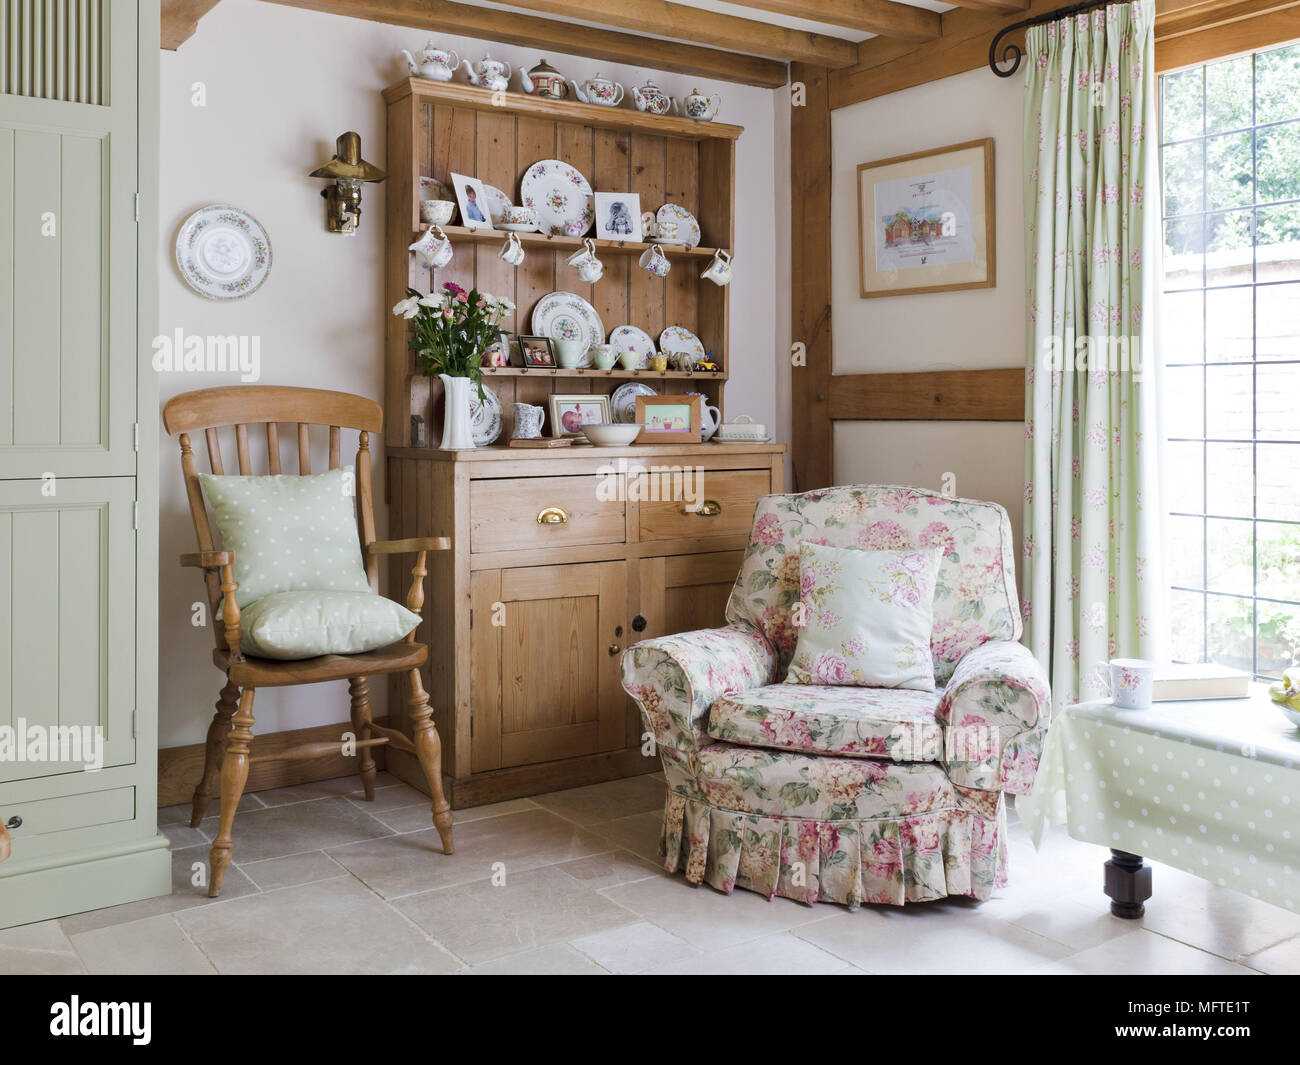 Upholstered armchair in front of dresser in country style room Stock Photo